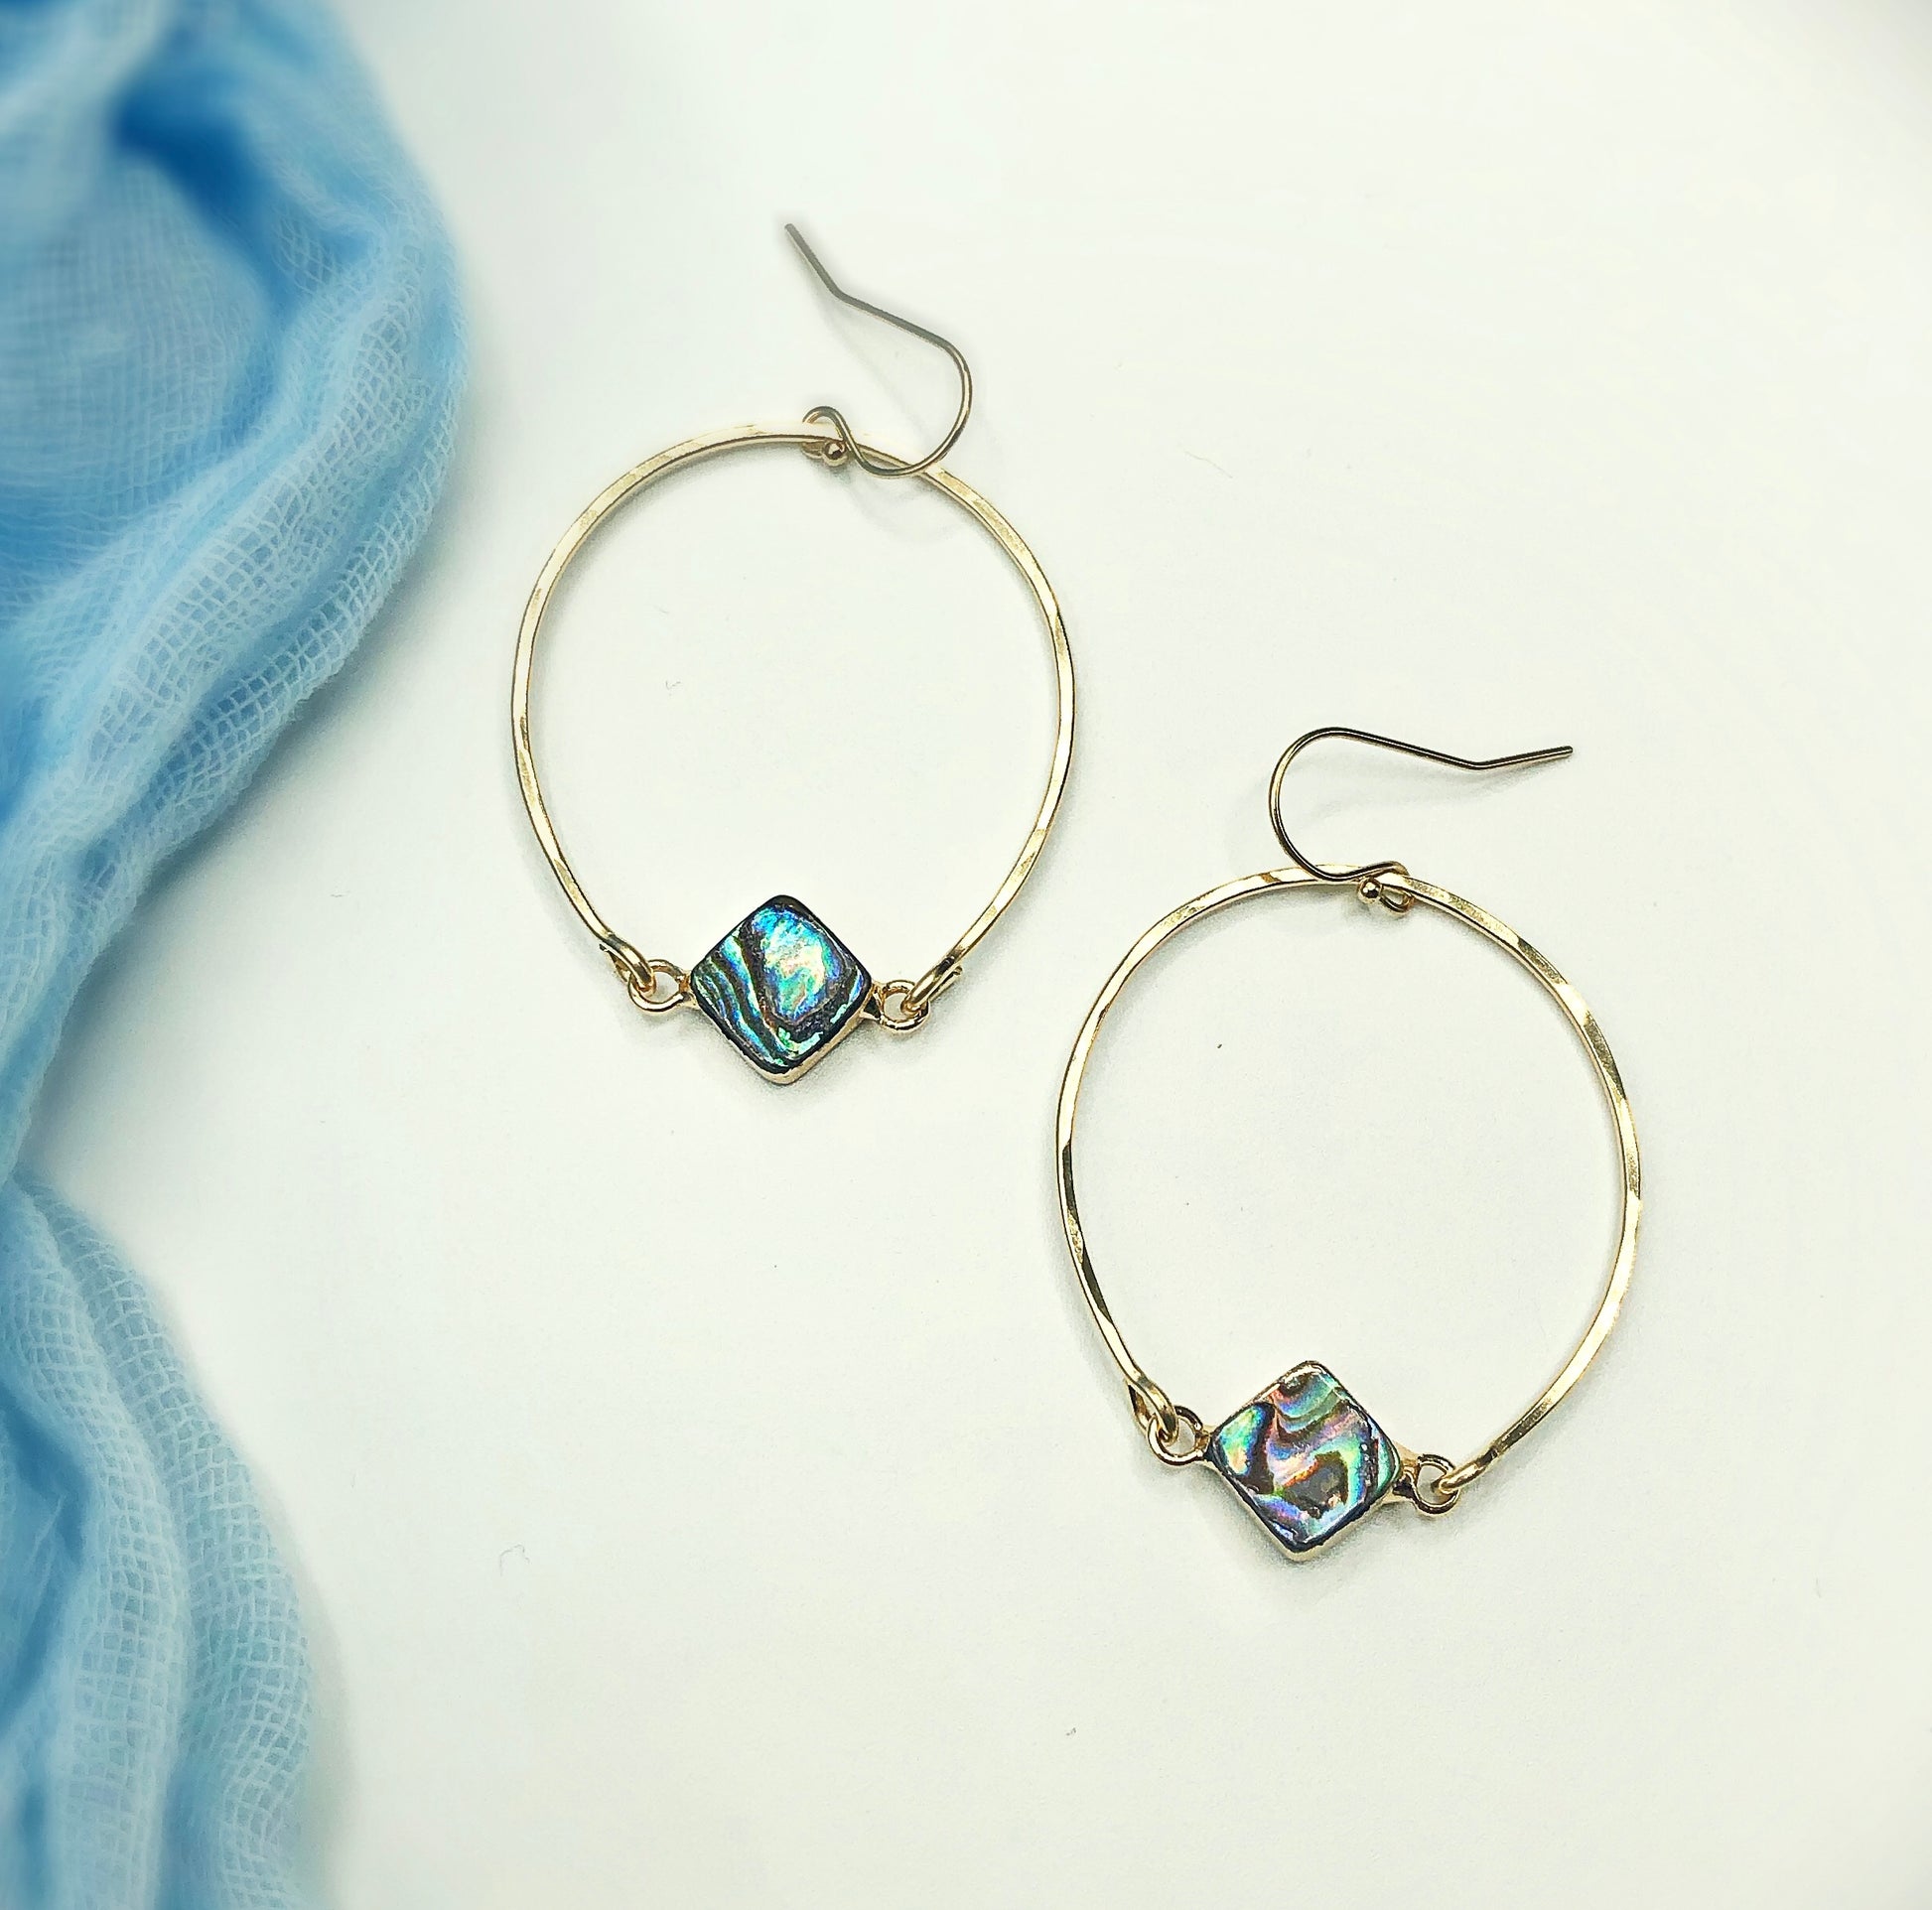 Beach Babe Abalone Small Hoops - Blue Sky Feathers